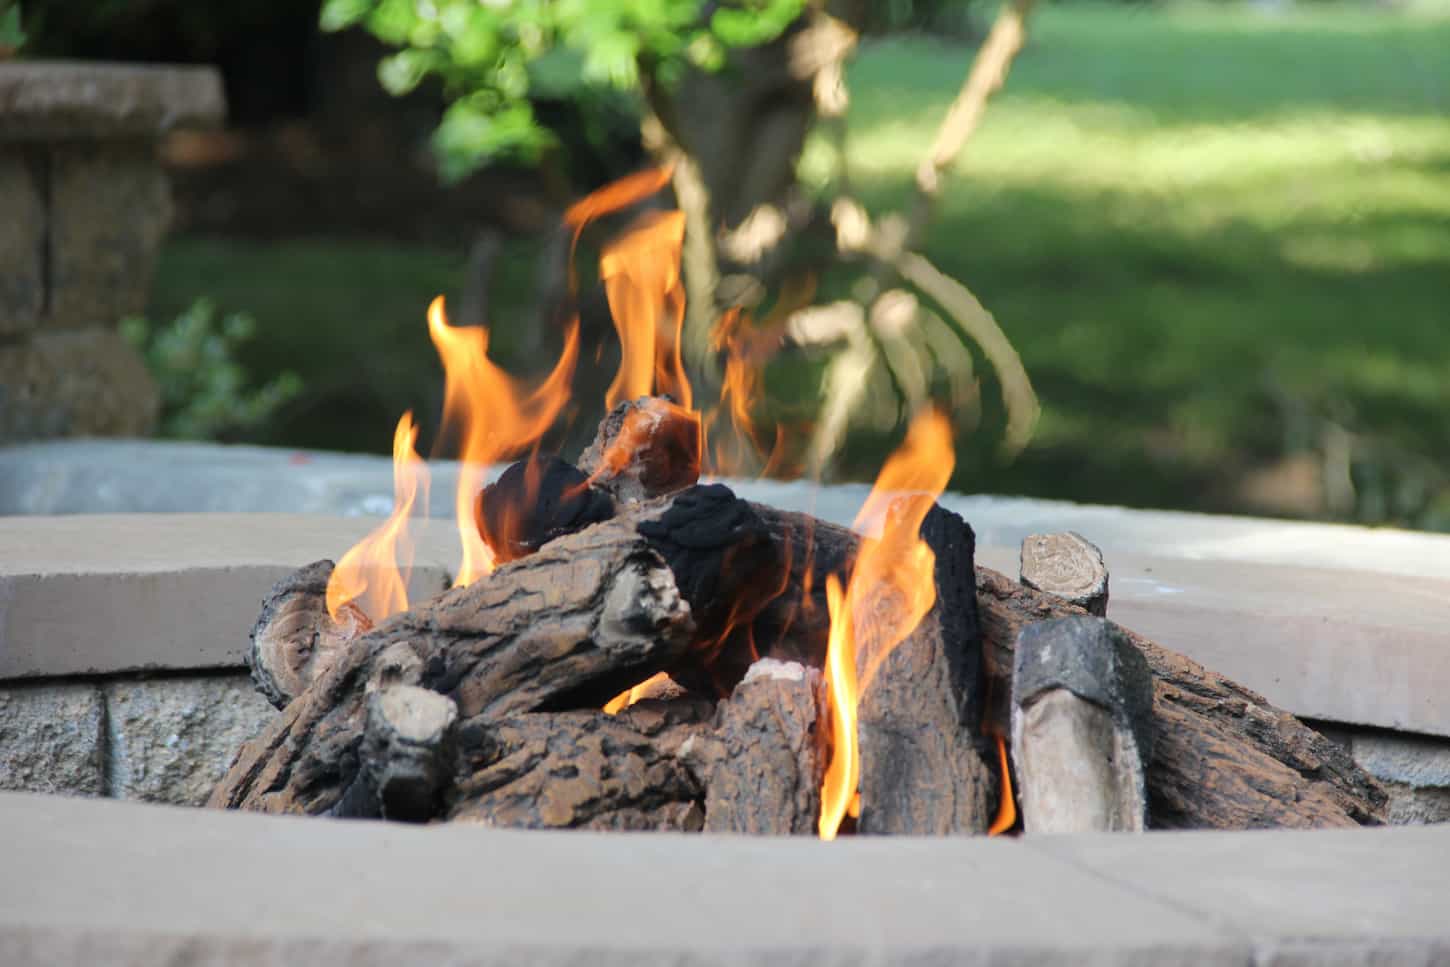 An image of Getting the fire ready with wooden logs in the fire pit for a fun summer gathering.